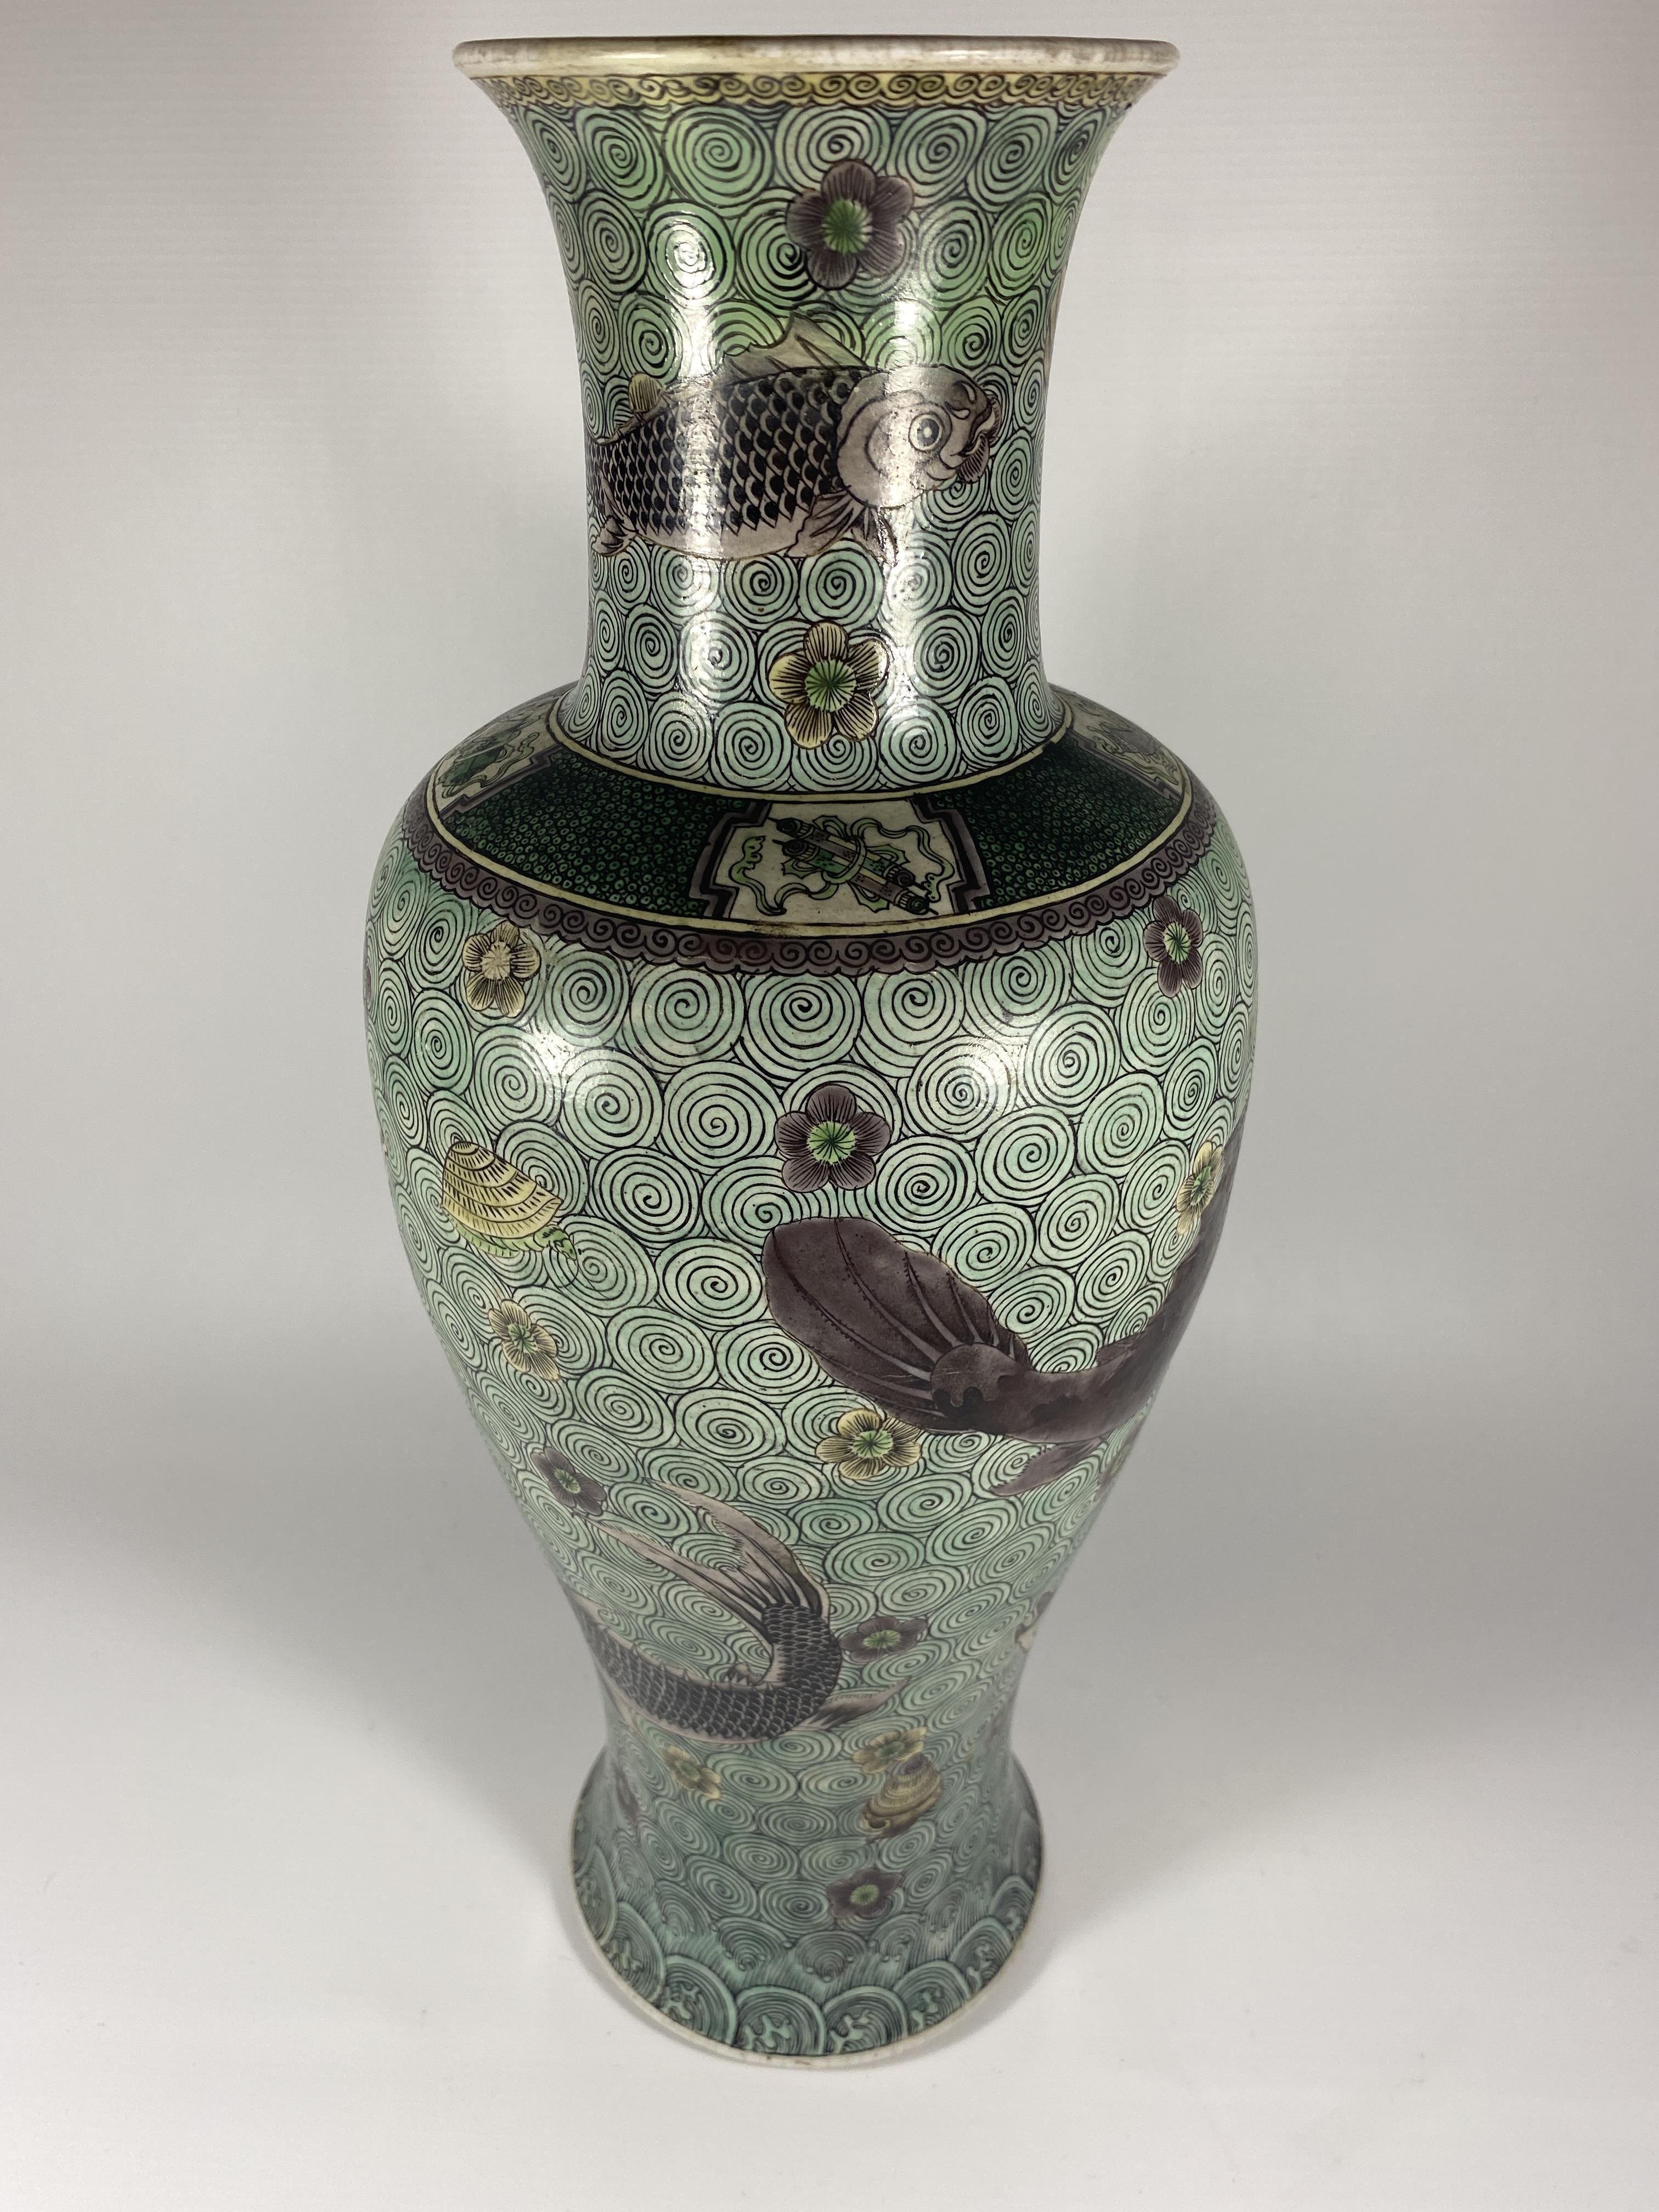 A LARGE MID 19TH CENTURY CHINESE BALUSTER FORM VASE WITH ENAMEL FISH ON A GEOMETRIC CIRCLES - Image 7 of 9